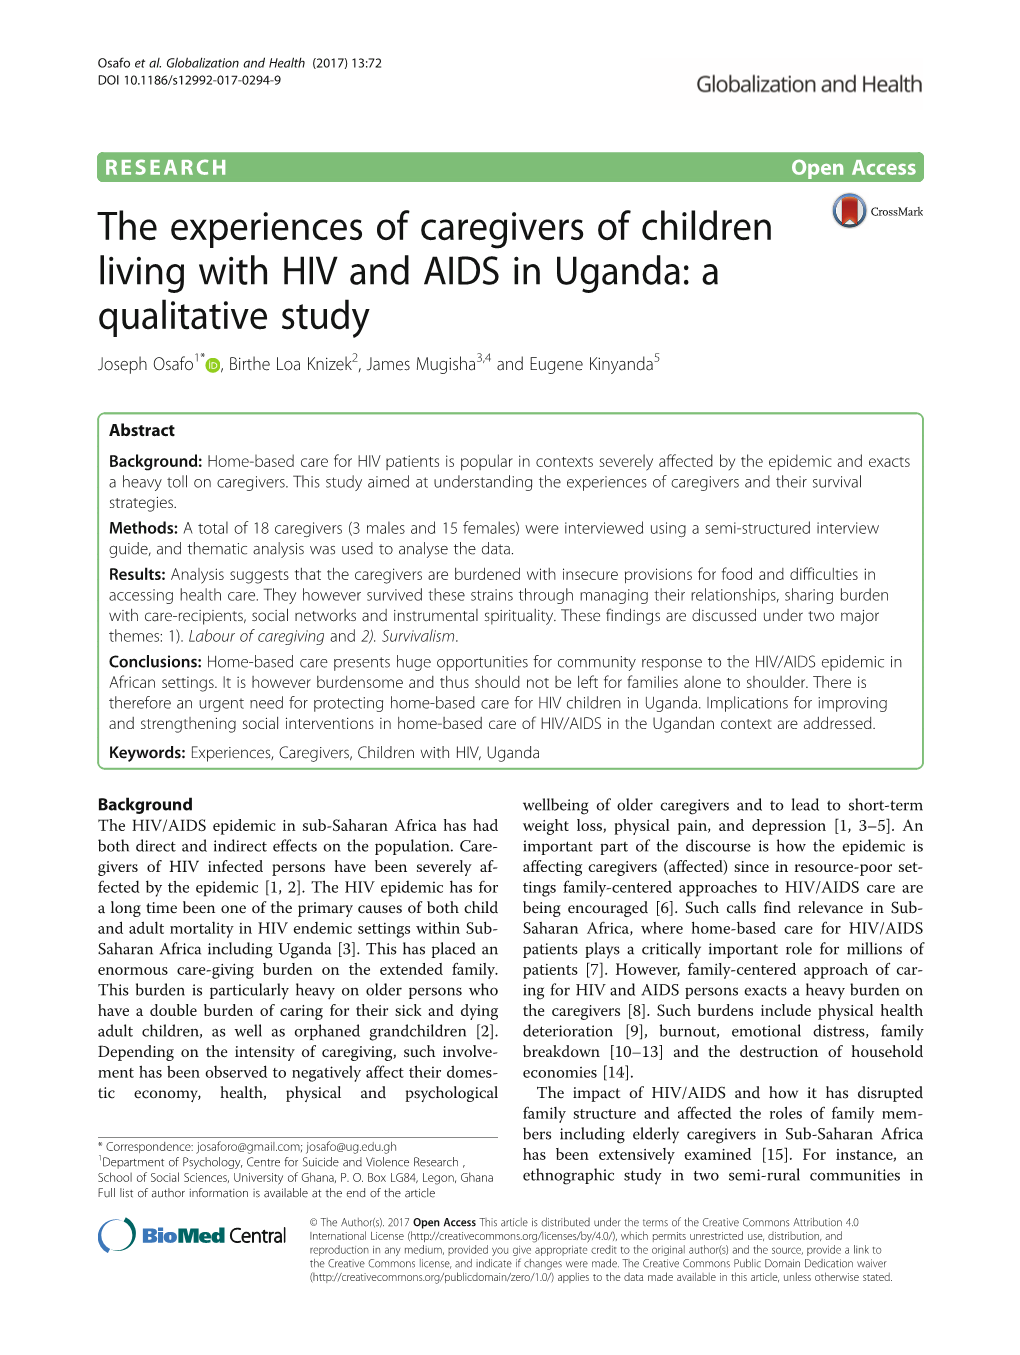 The Experiences of Caregivers of Children Living with HIV and AIDS in Uganda: a Qualitative Study